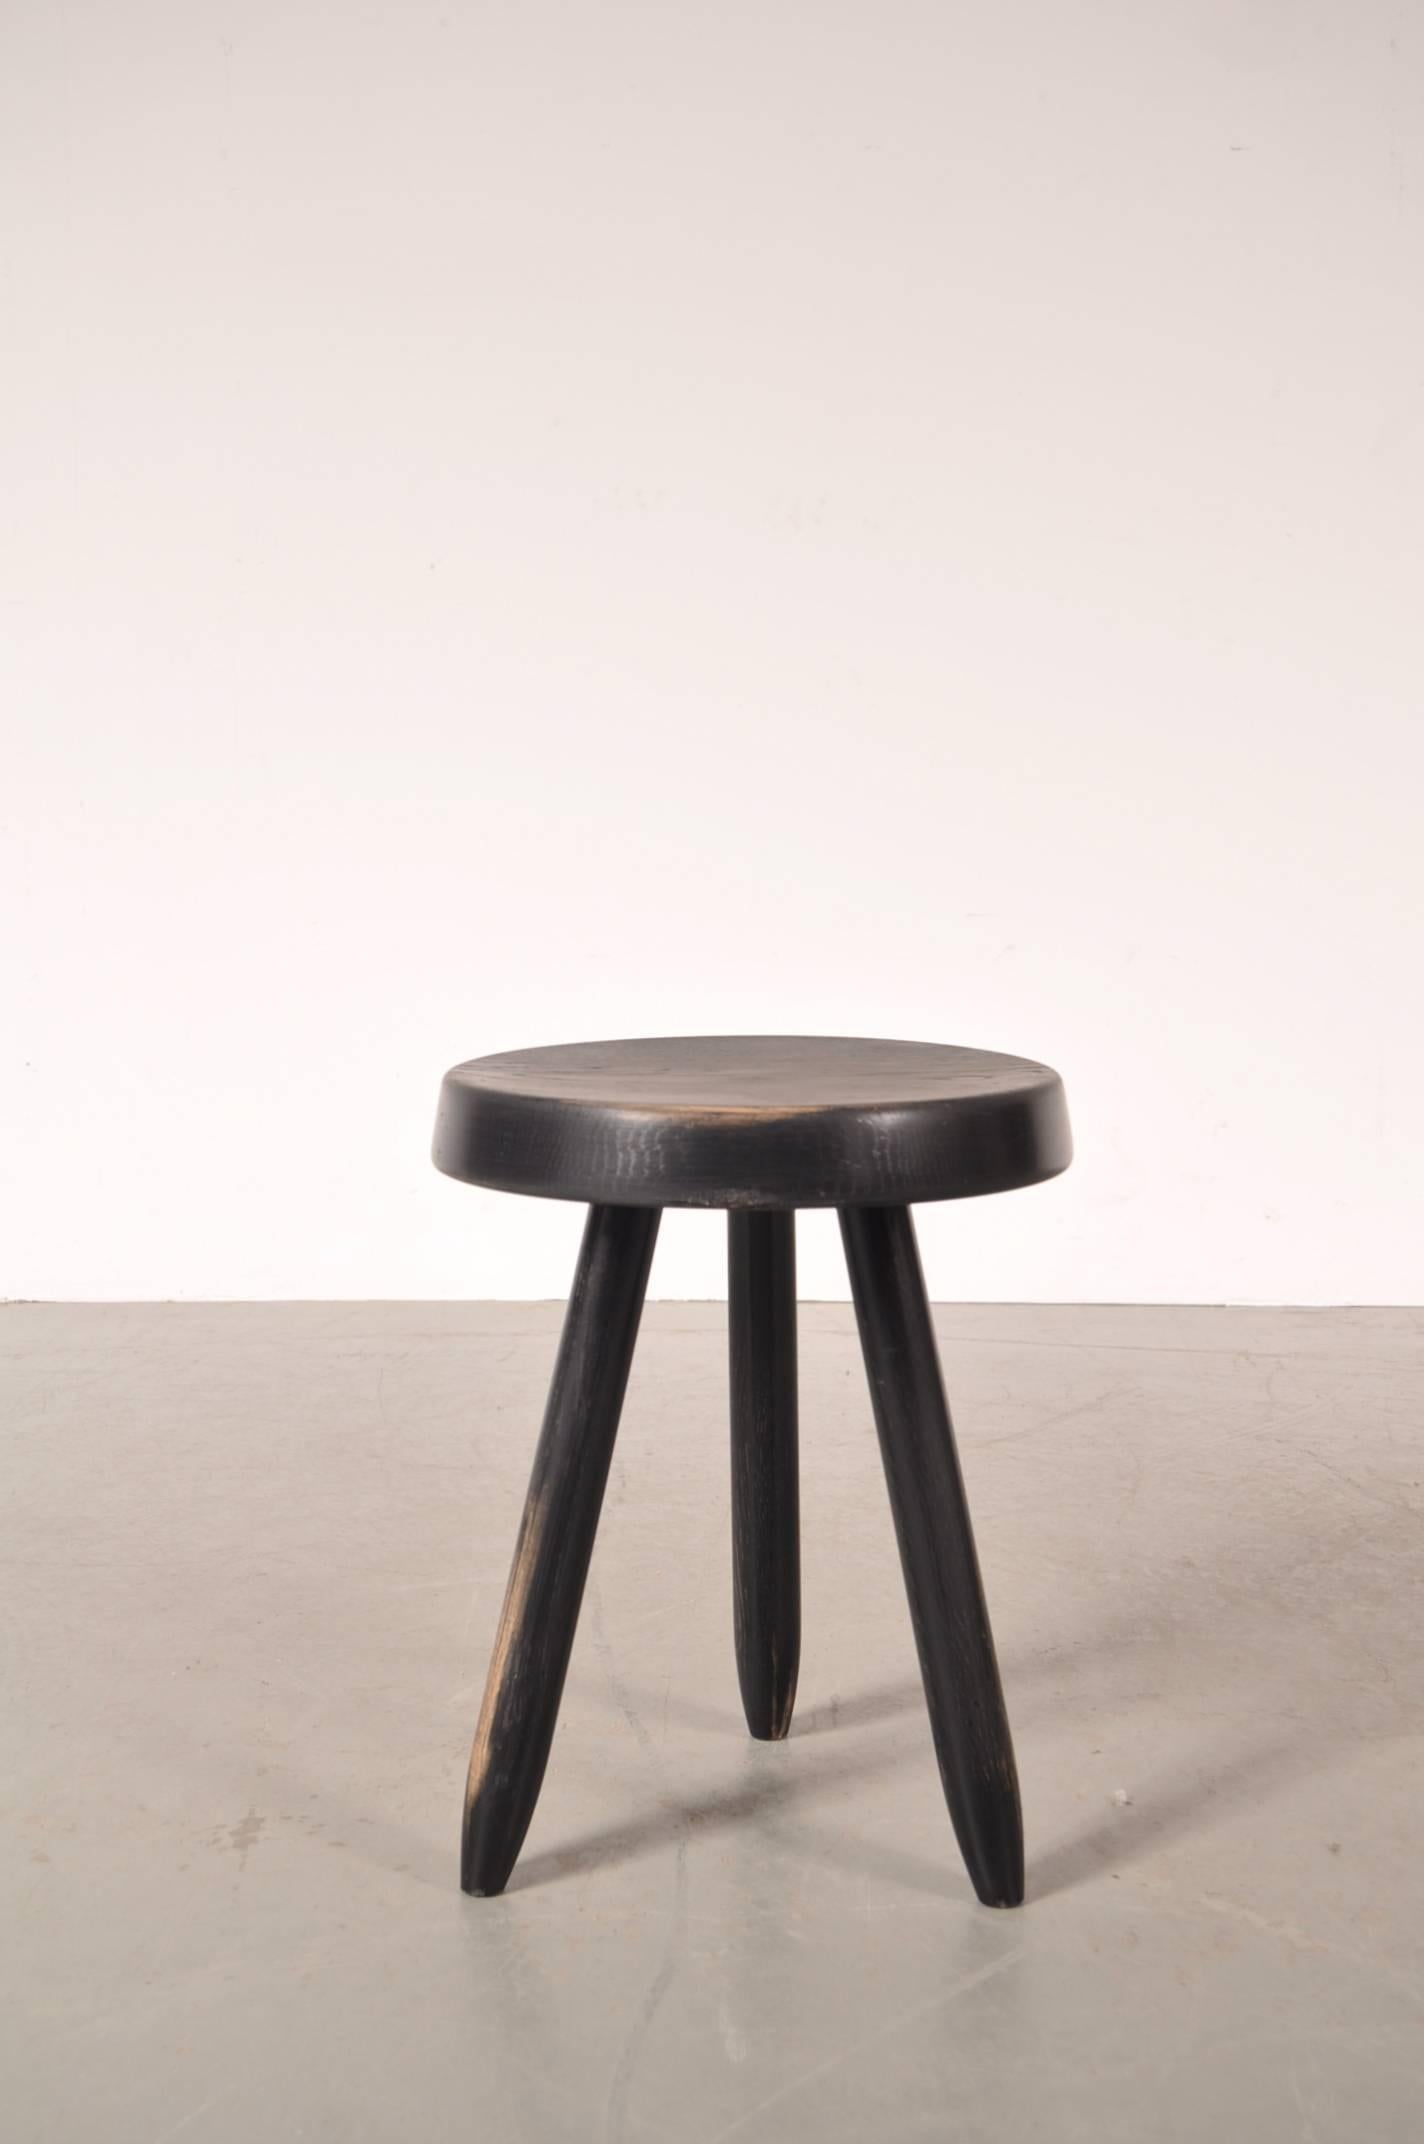 Beautiful high model stool by Charlotte Perriand for Les Arcs in France, circa 1950.

This lovely piece is made of black ebonized wood and has a round seat on a tripod base. These stools were designed for the apartments at a ski resort in Les